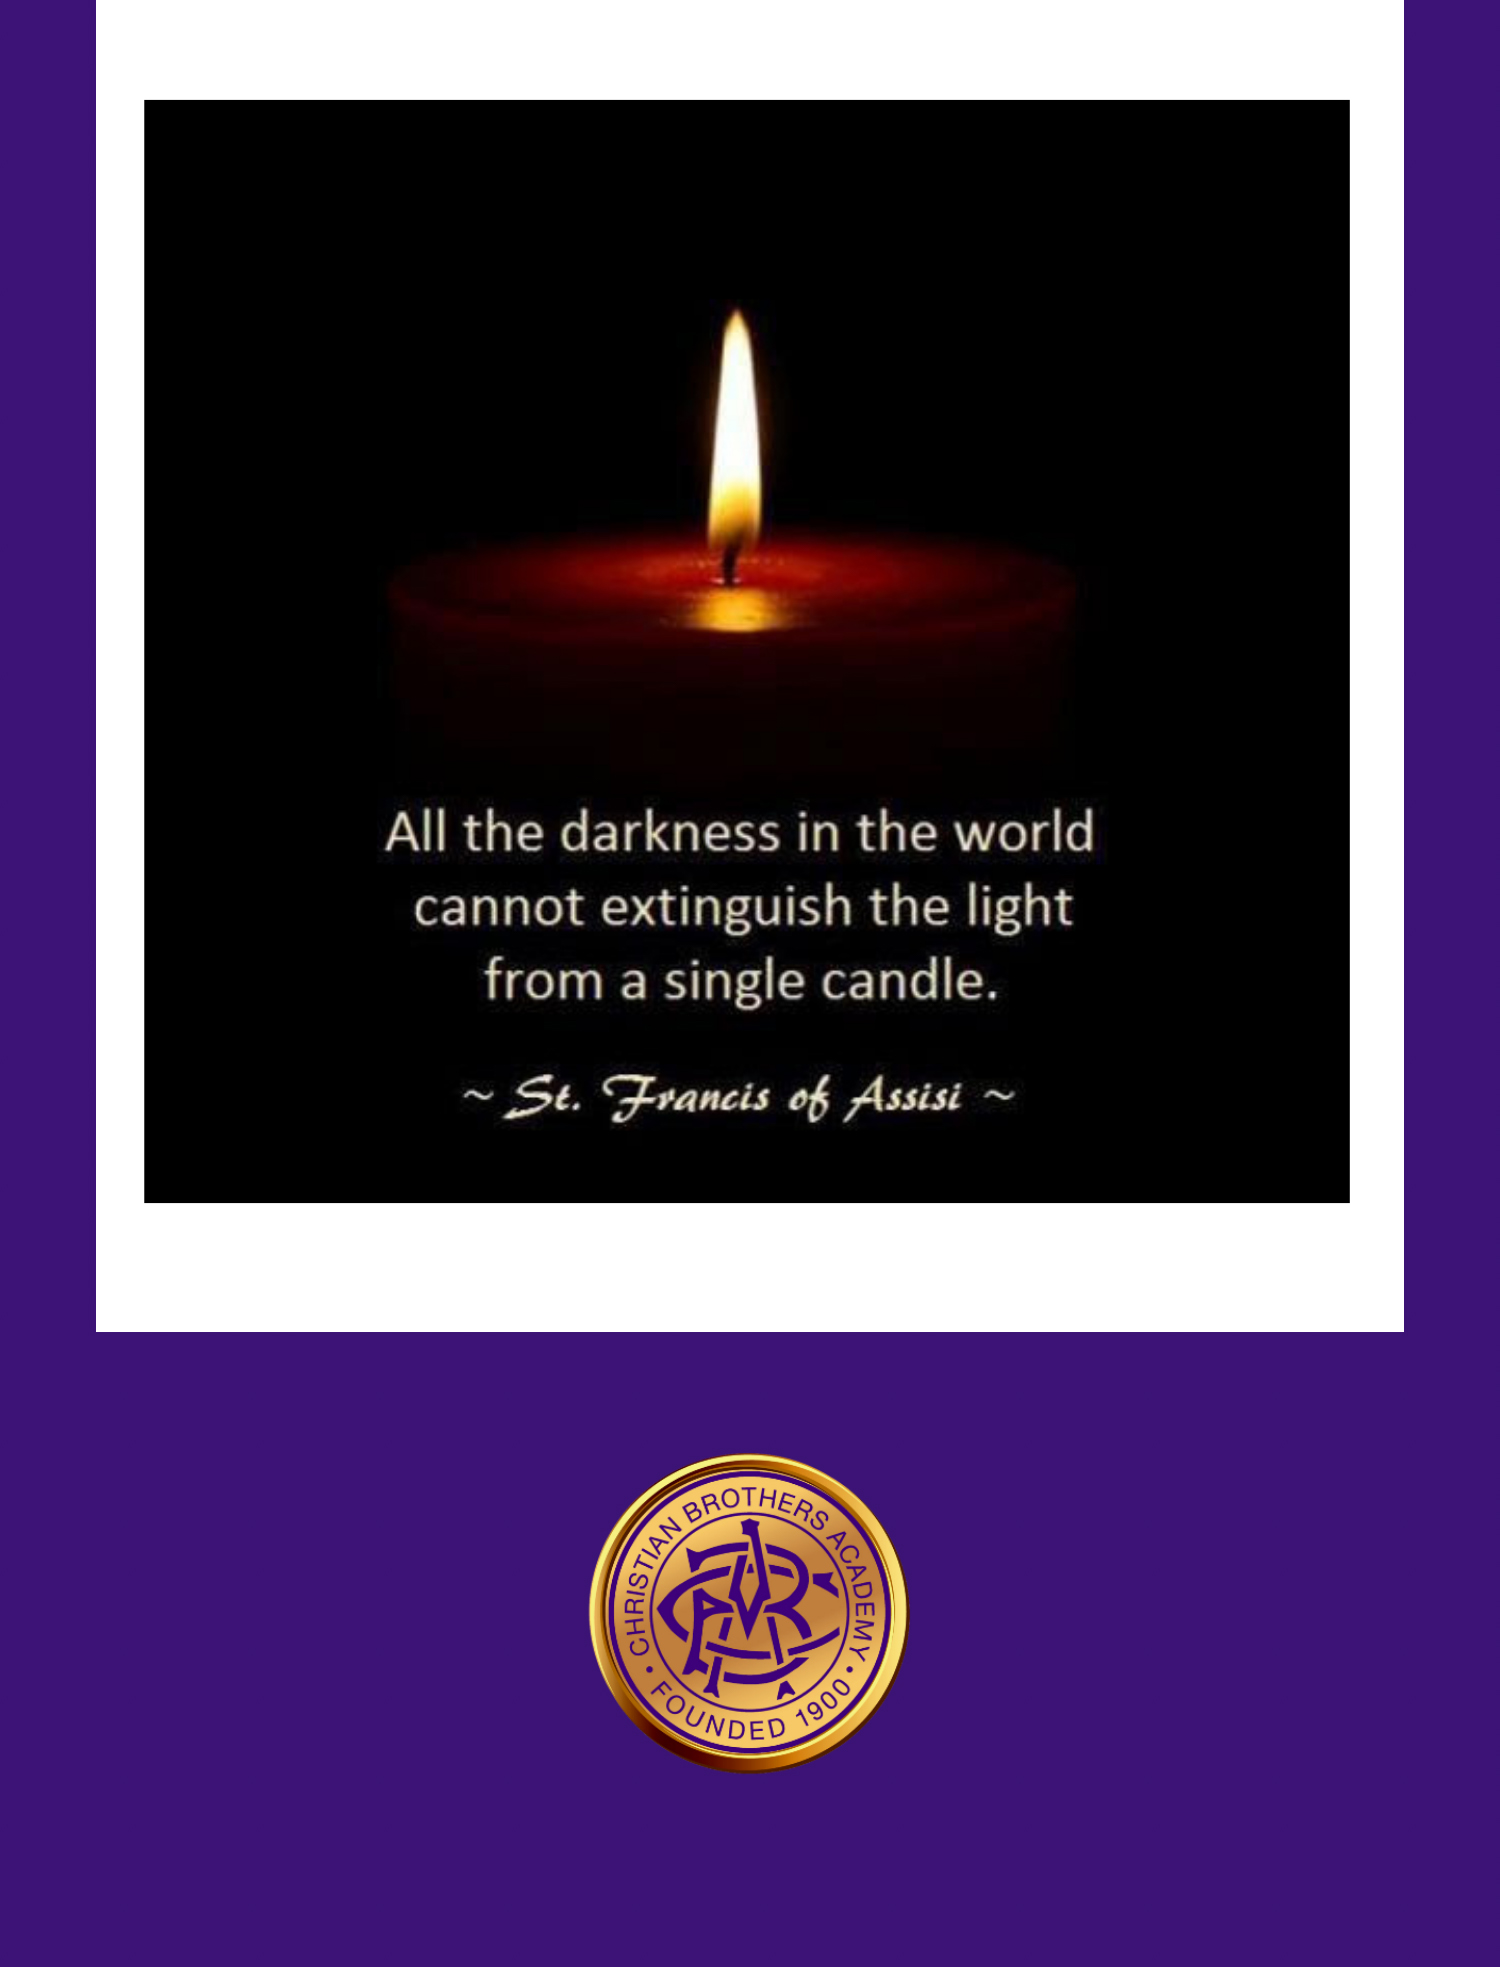 Christian Brothers Academy in Syracuse, NY "All the darkness in the world cannot extinguish the light from a single candle. - Saint Francis of Assisi